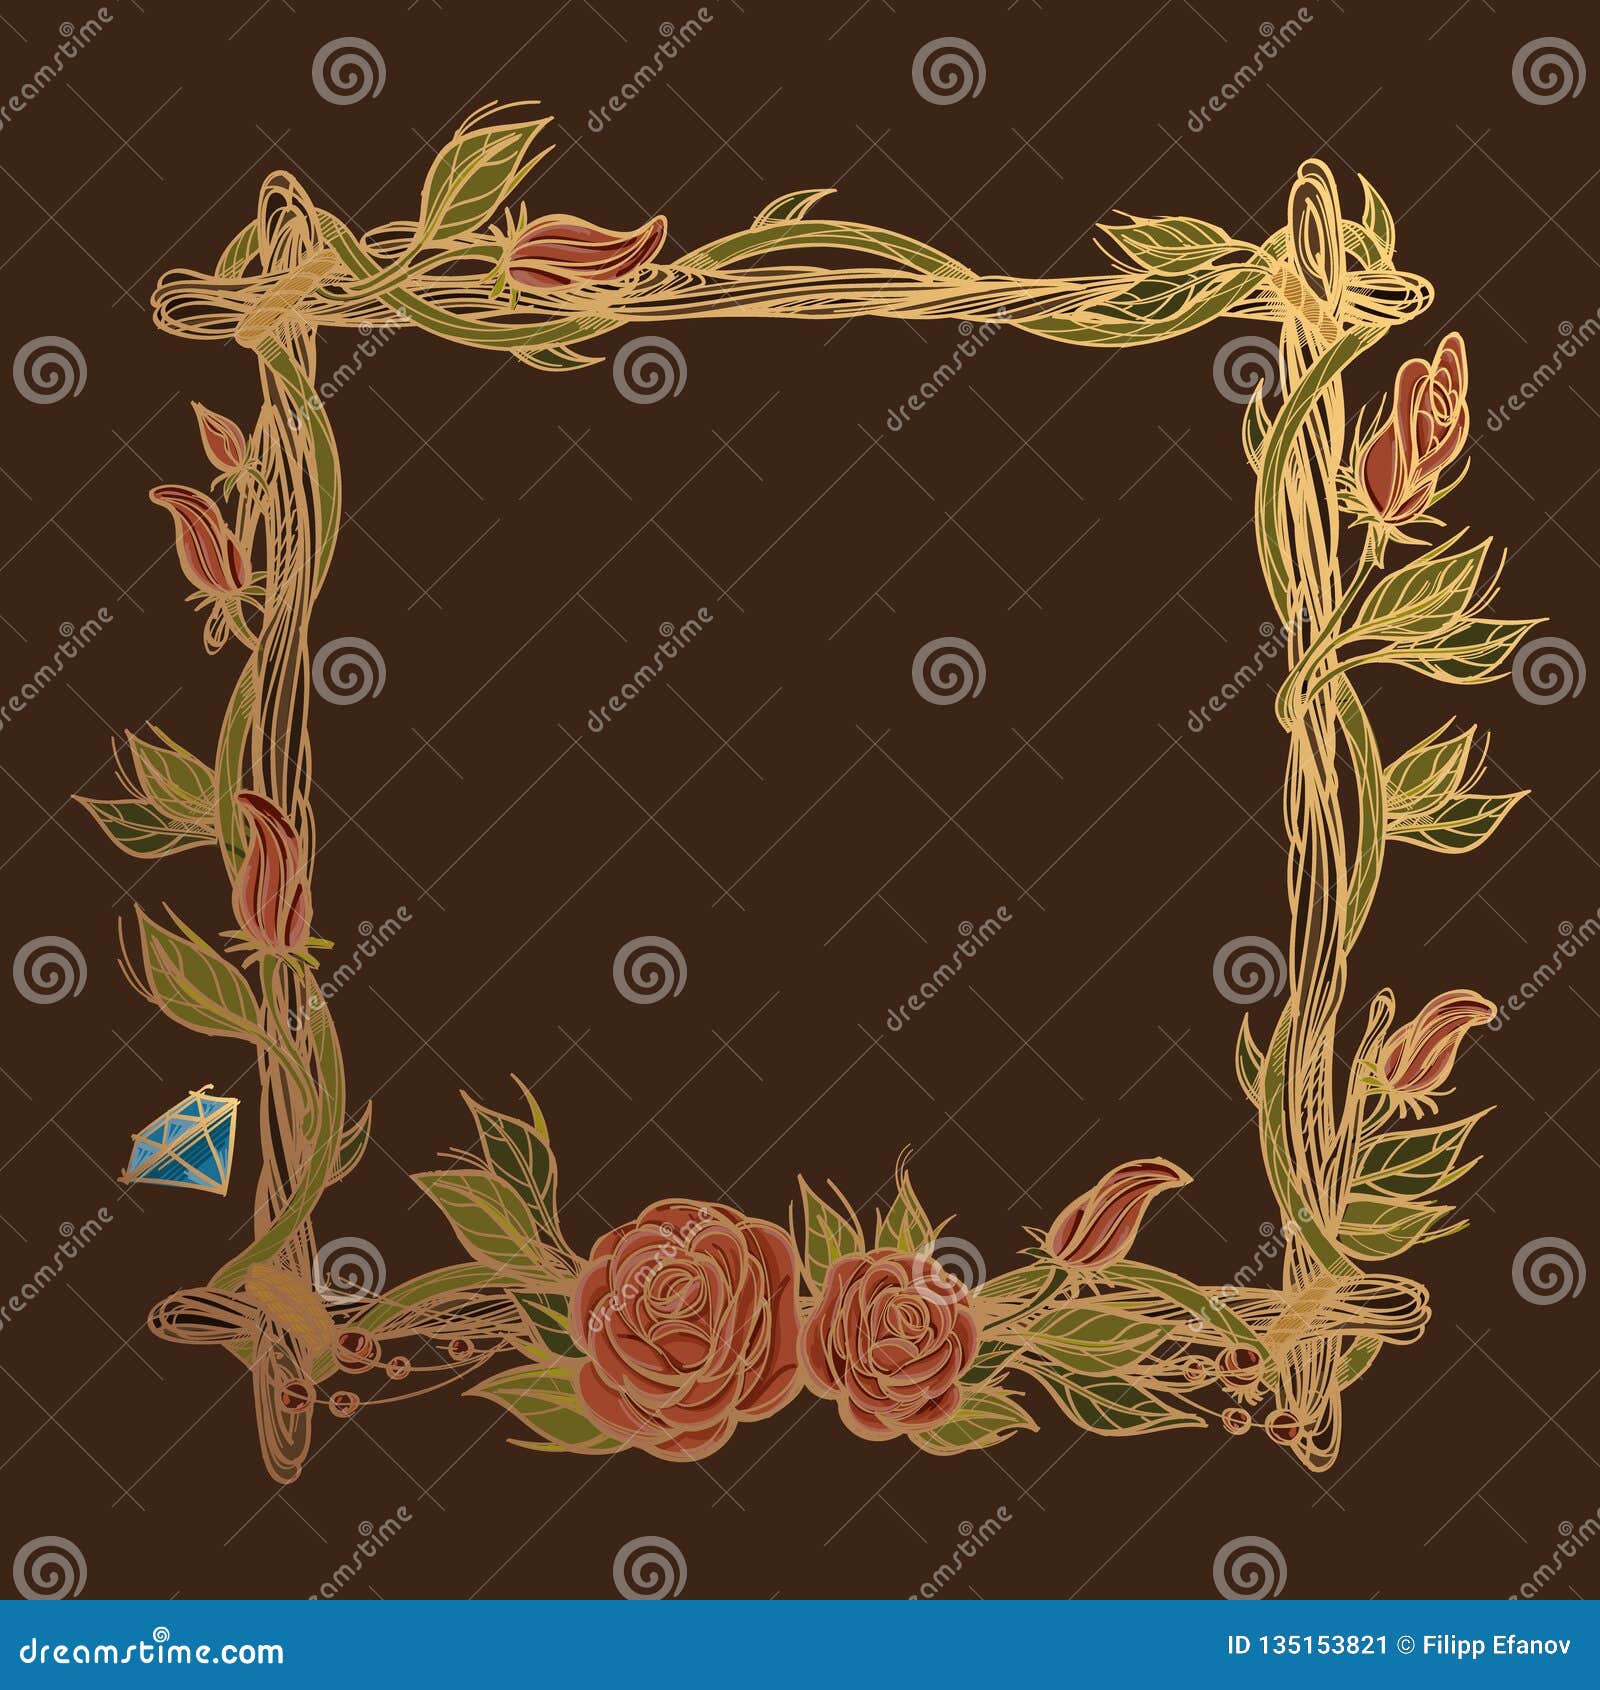 Square Golden Frame Made of Branches with Roses and Flower Buds